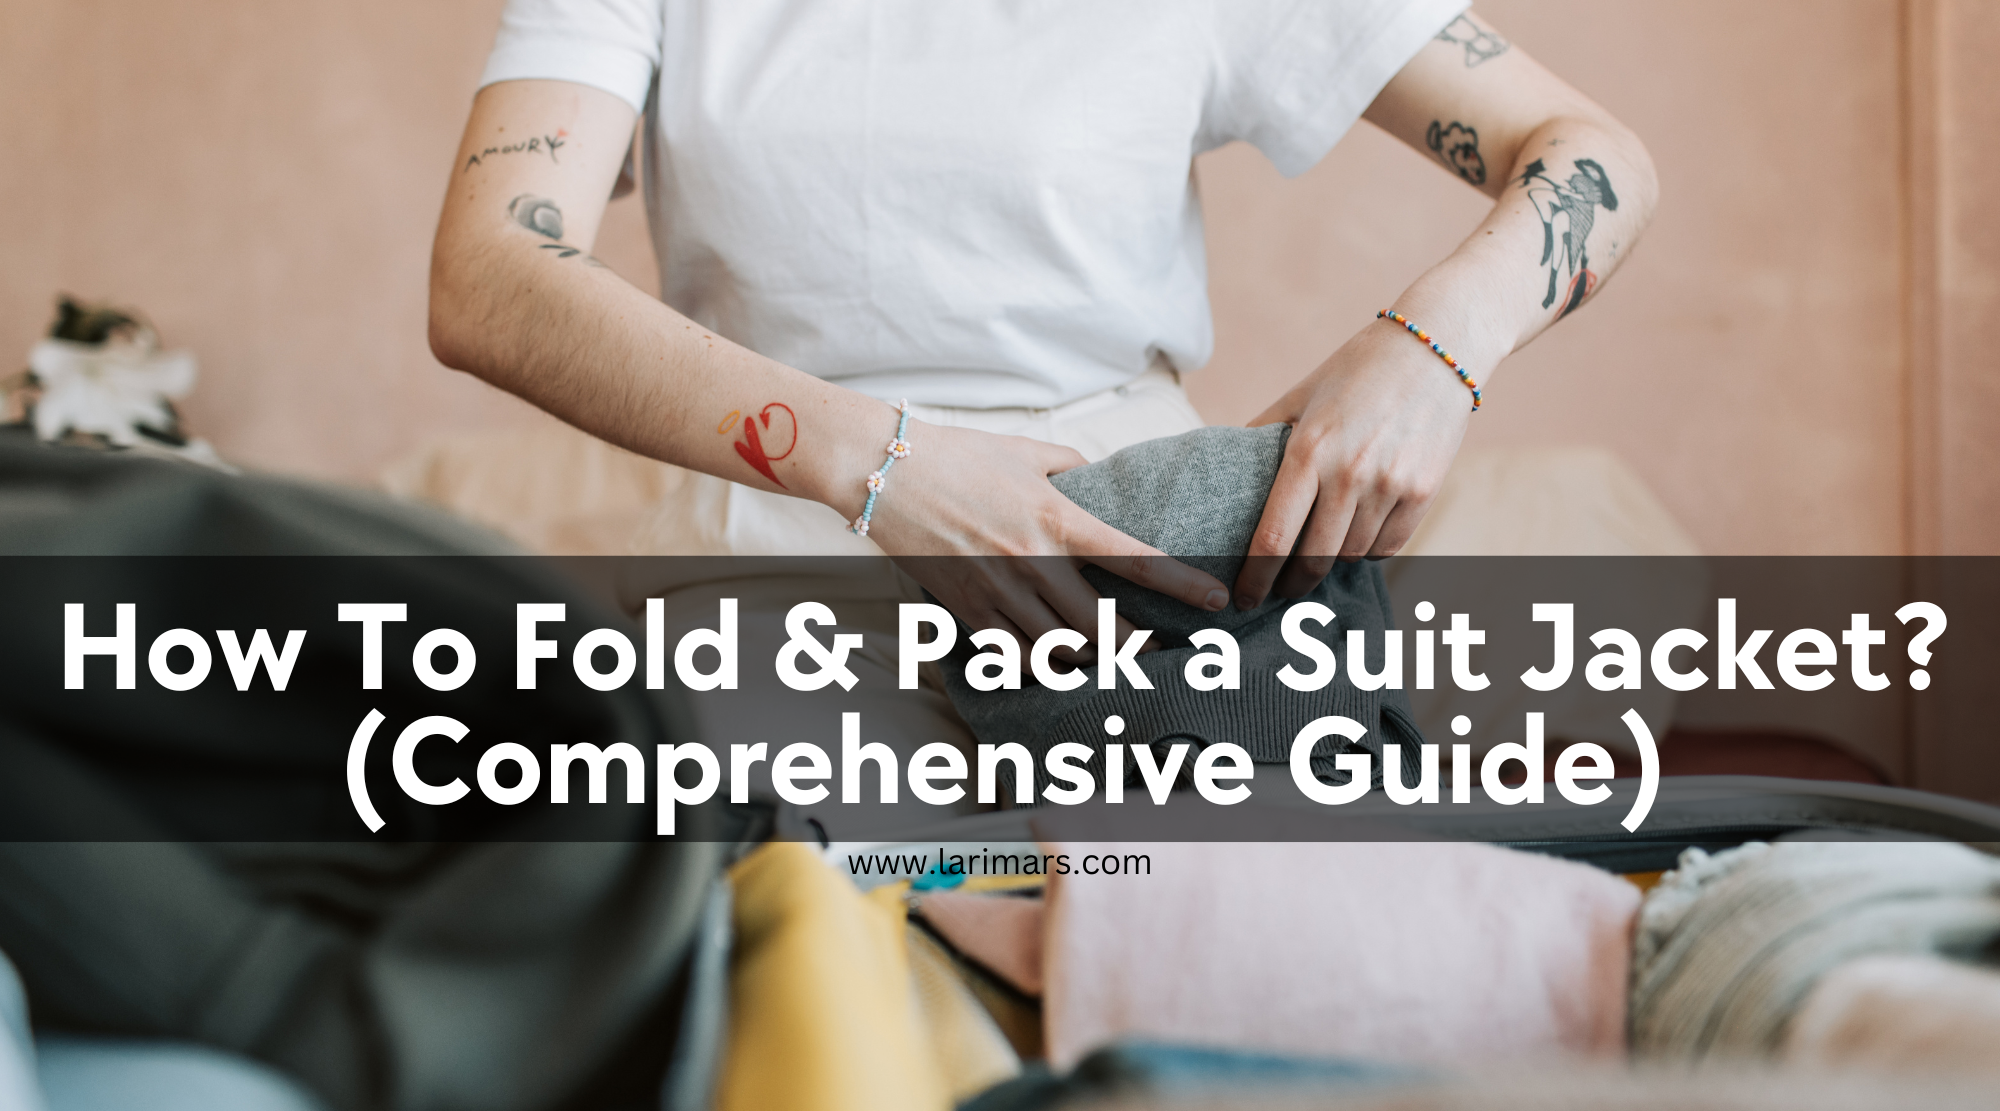 How To Fold & Pack a Suit Jacket? (Comprehensive Guide)